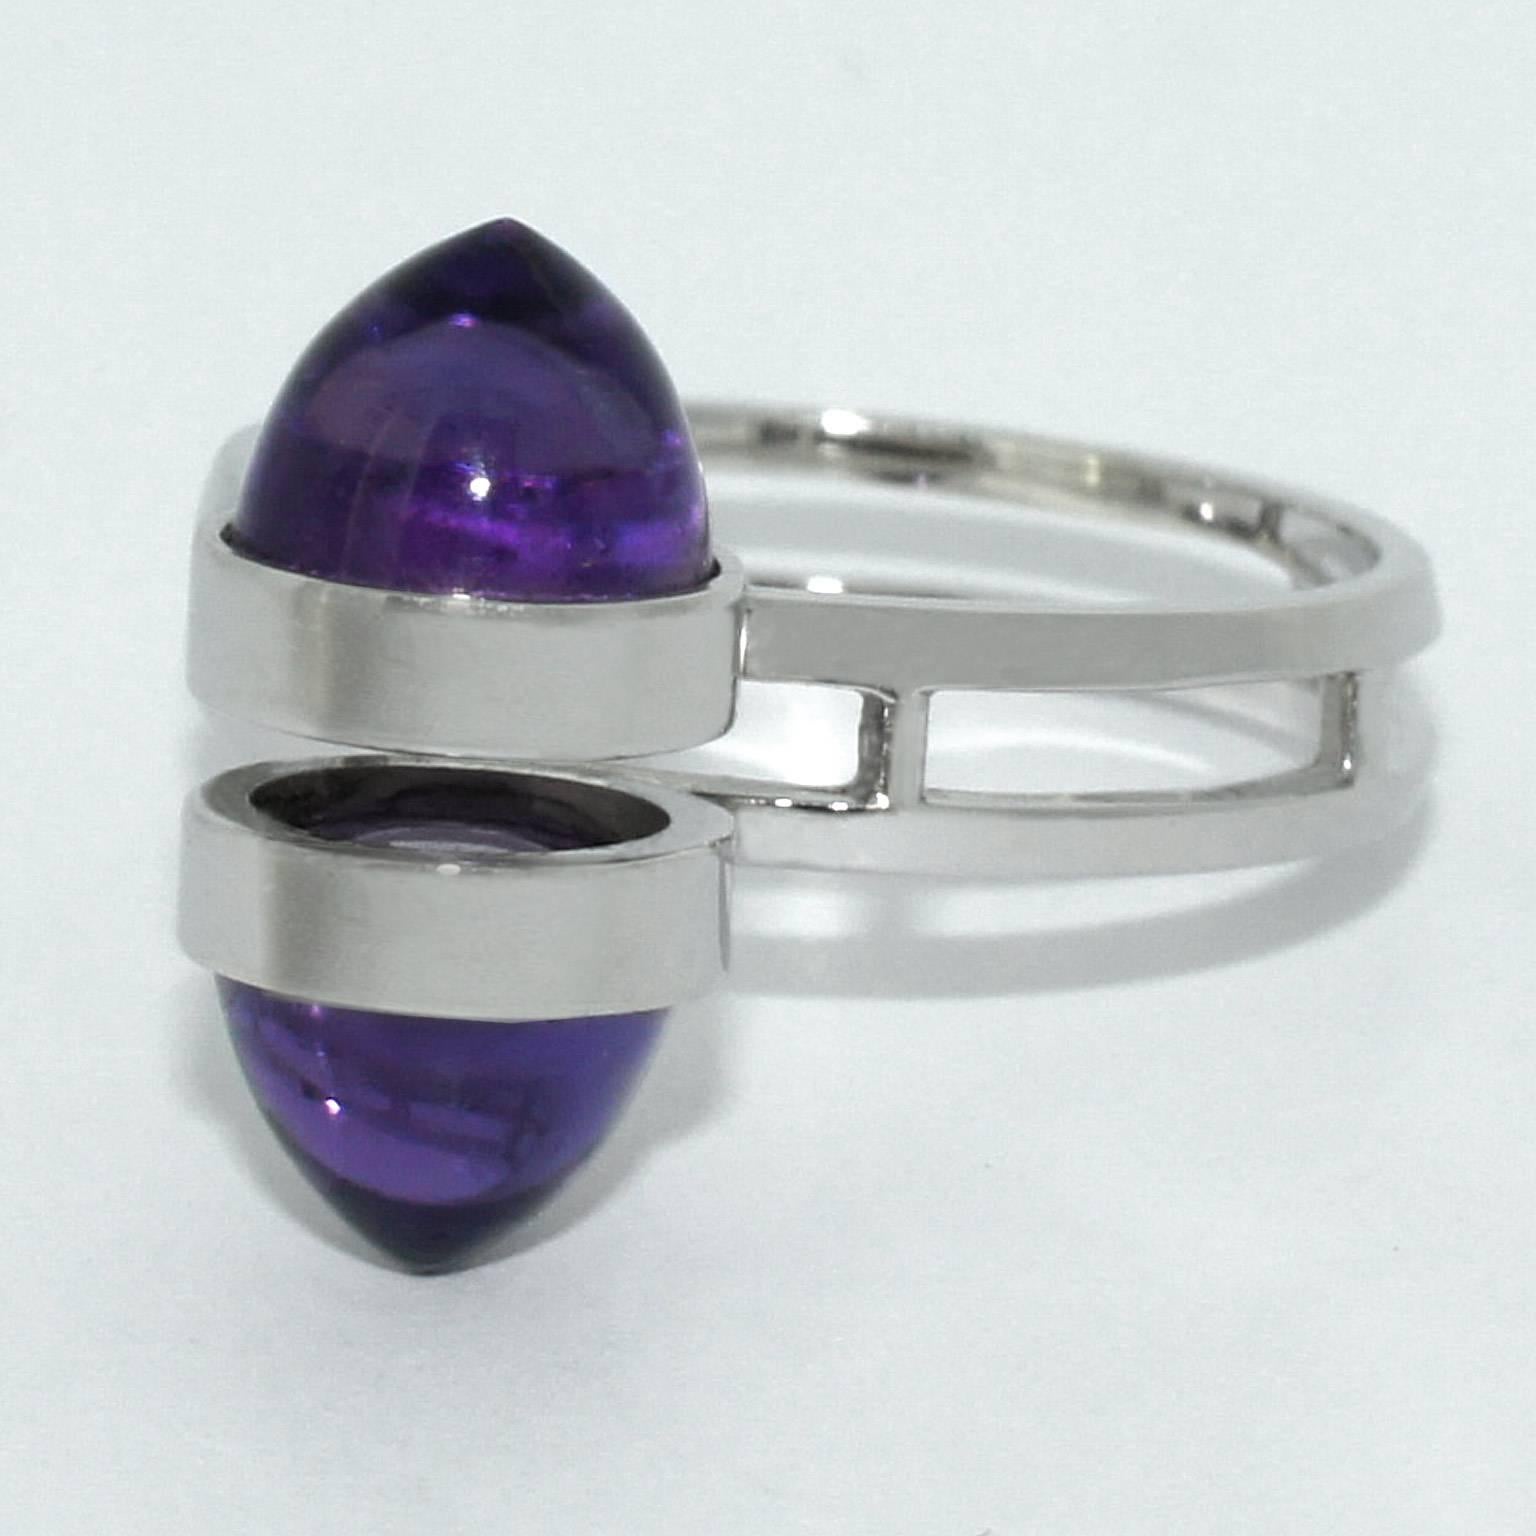 Crafted in Sydney, in 9 karat white gold, this striking contemporary ring features two beautiful royal purple Brazilian amethysts, set atop a double band in a tandem formation.

Ring size M 1/2 (UK/Australian), 6 1/2 (US), 53 (European).